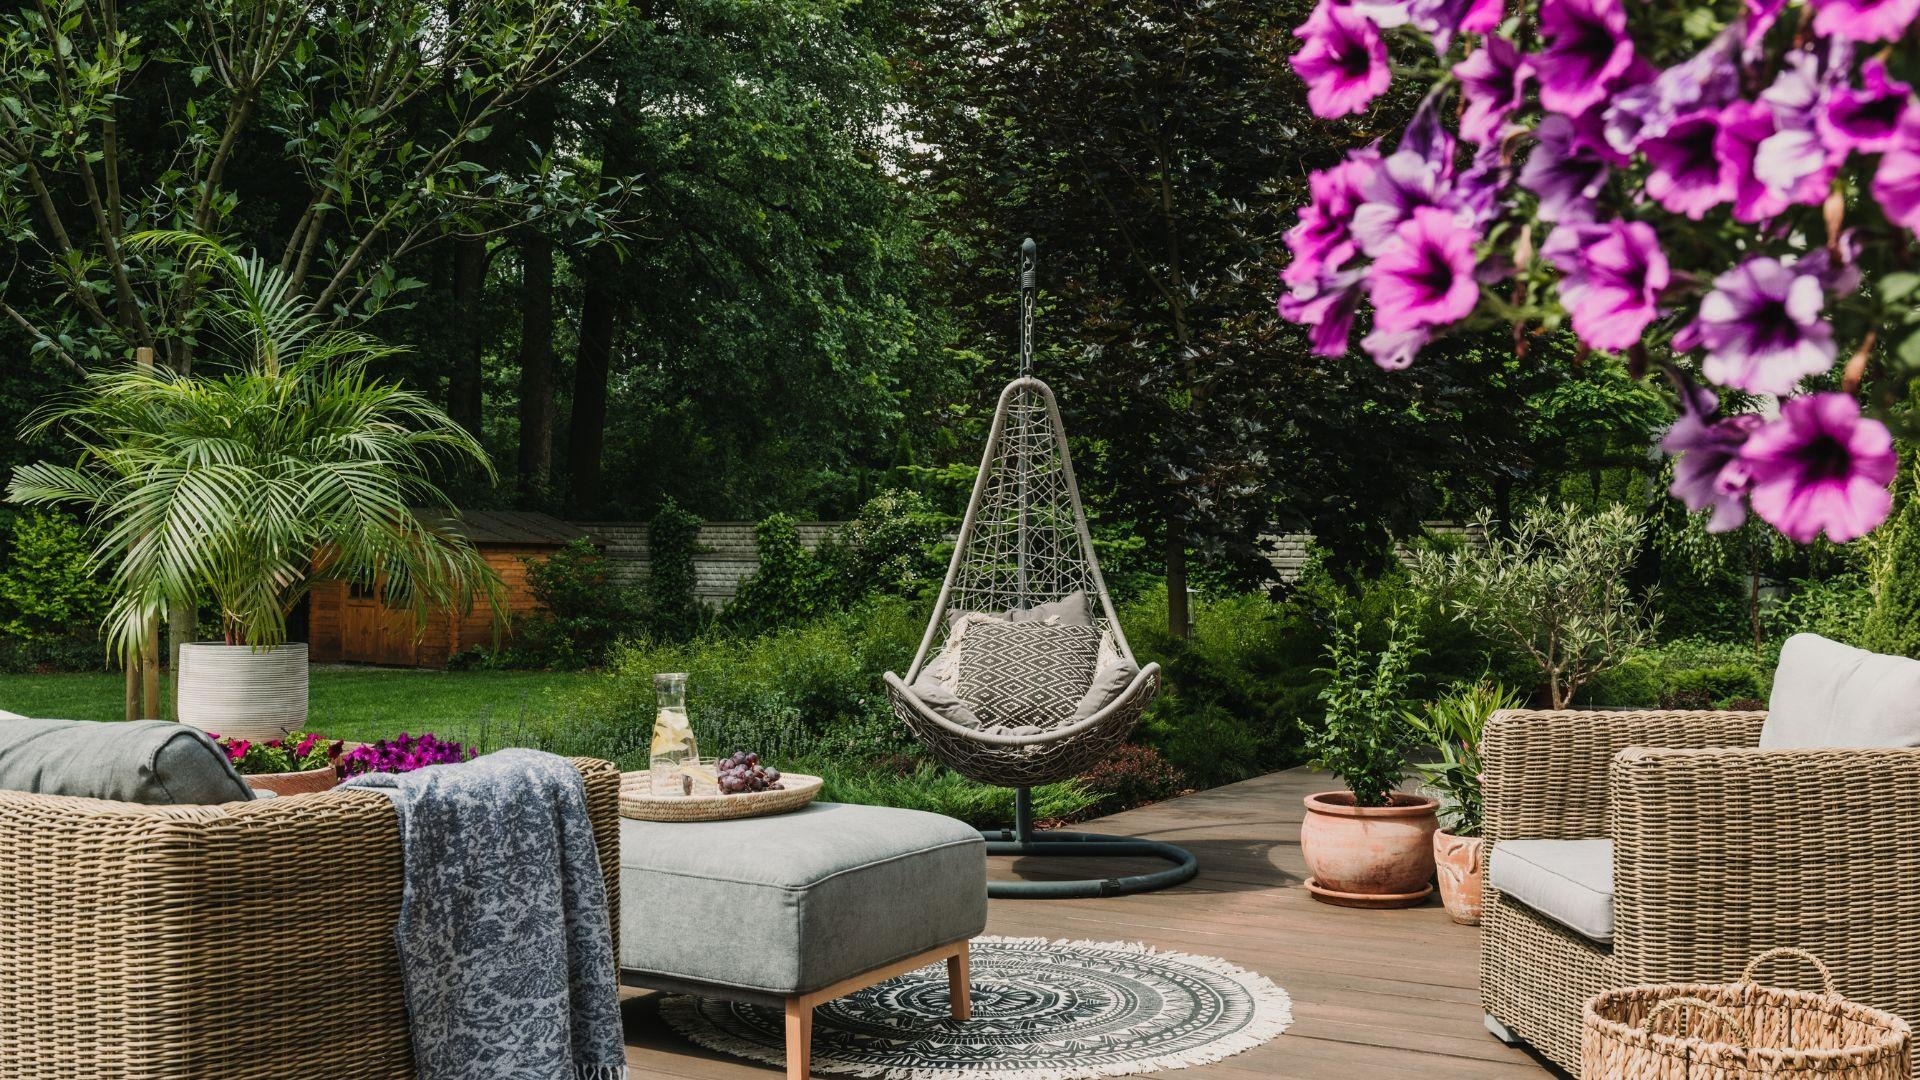 Furnishing_the_outdoor_spaces_ideas_to_create_a_relaxing_oasis_in_your_garden_IDW_Italia-Prague-Biella